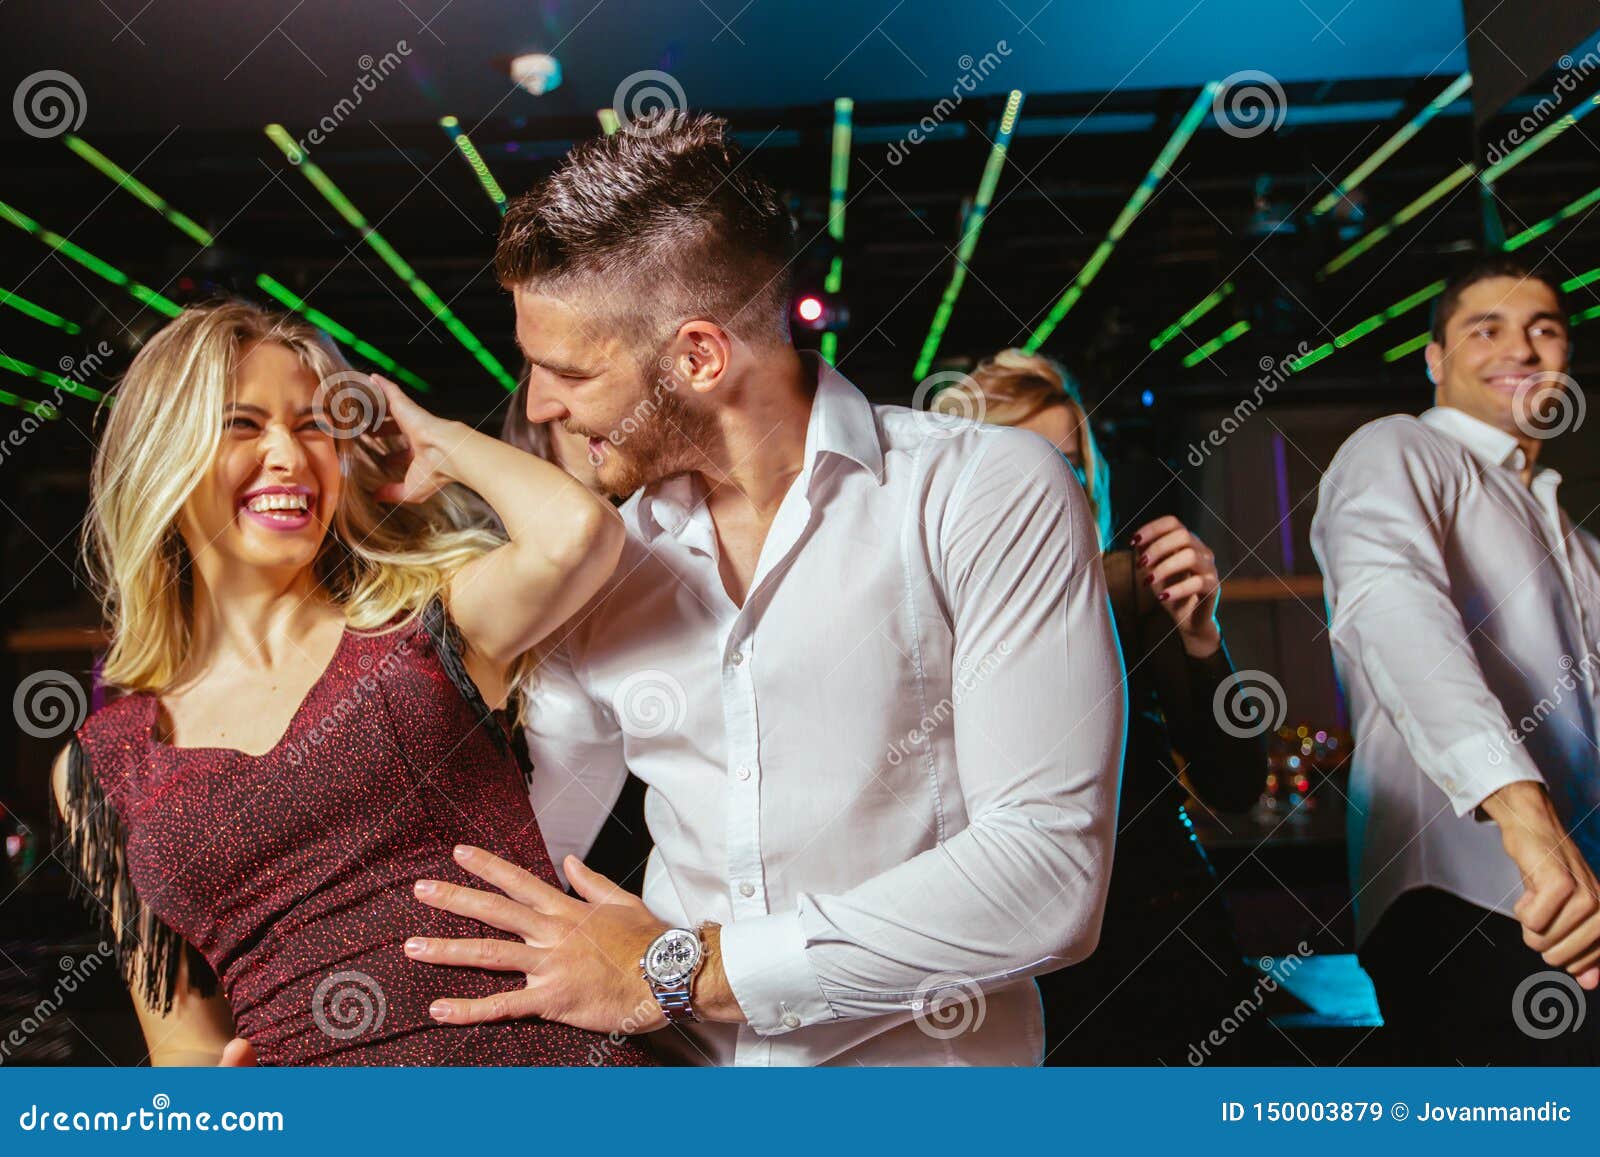 Happy People are Dancing in Club. Stock Image - Image of club, luxury ...